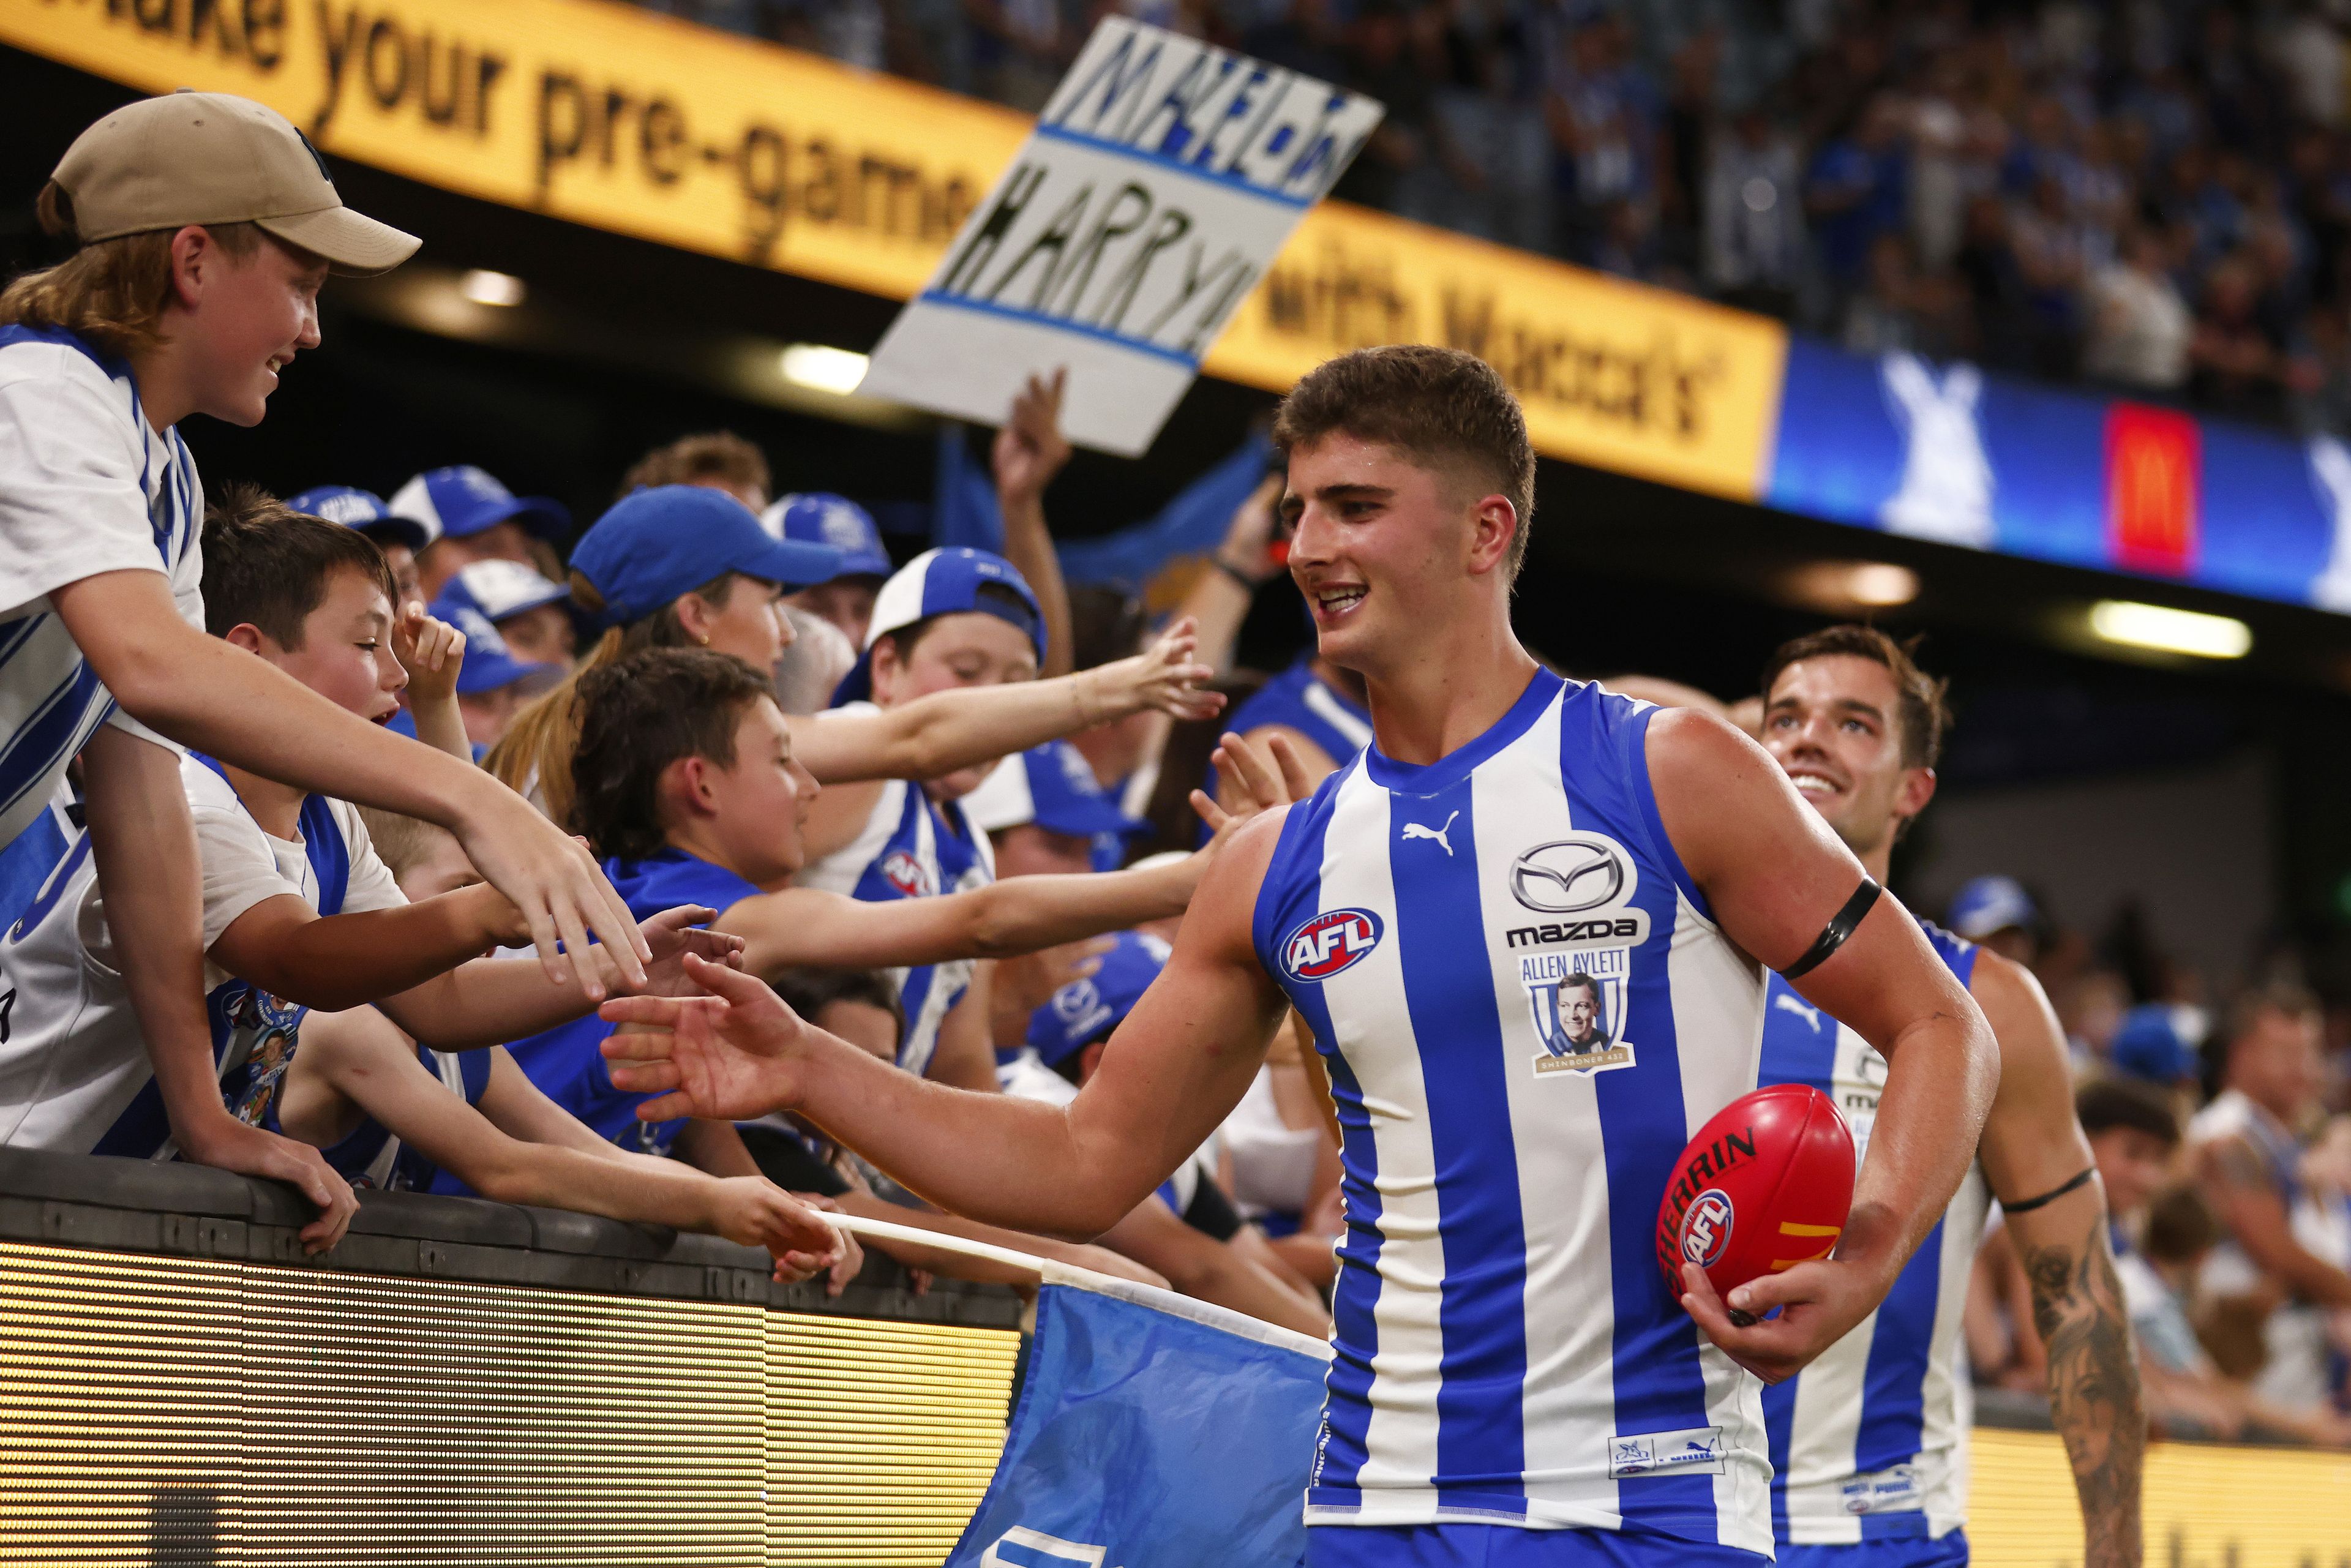 'Give him the reins': Nick Riewoldt backs Harry Sheezel to captain North Melbourne in 2025